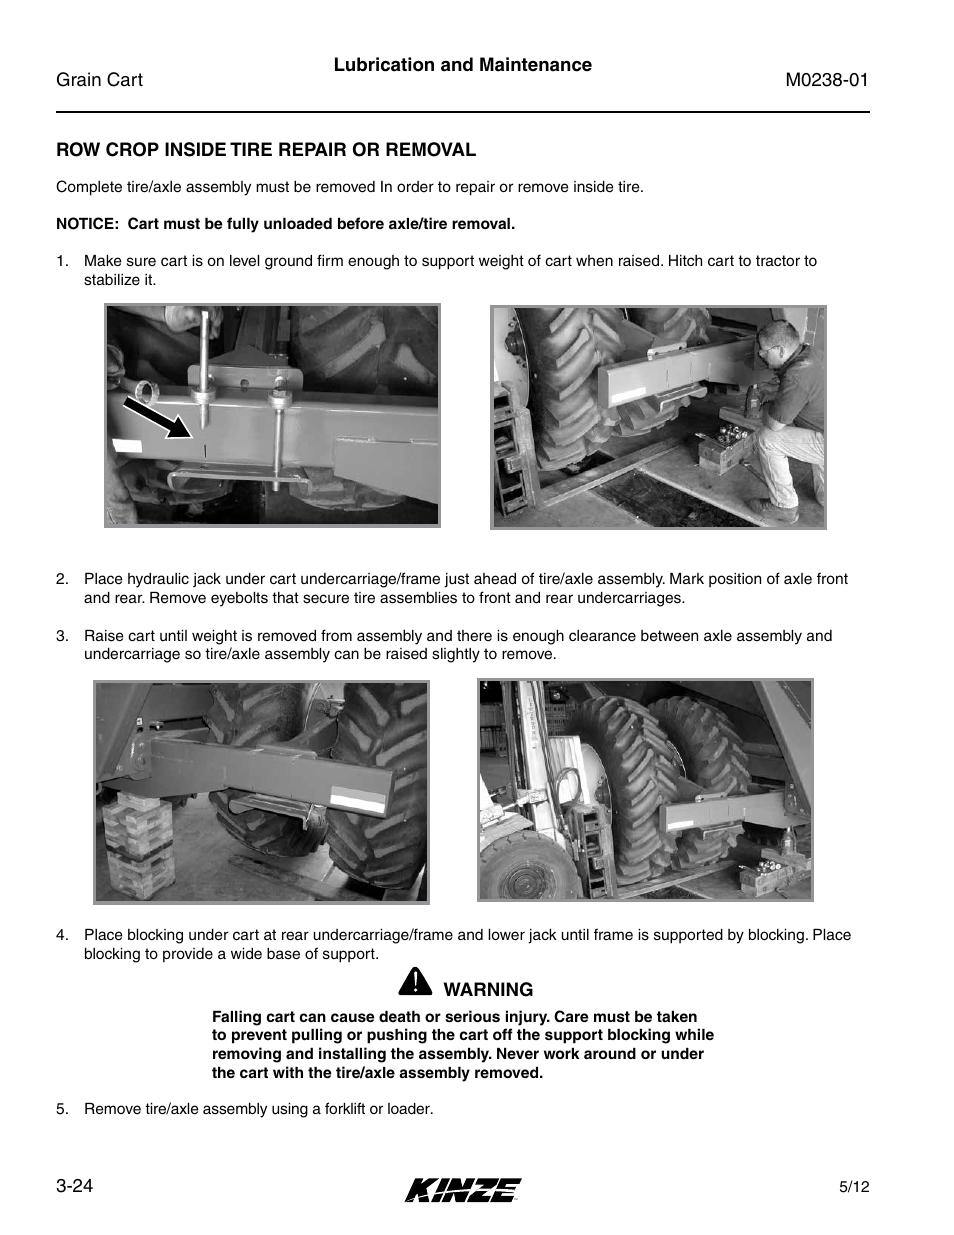 Row crop inside tire repair or removal, Row crop inside tire repair or removal -24 | Kinze Grain Carts Rev. 7/14 User Manual | Page 60 / 70